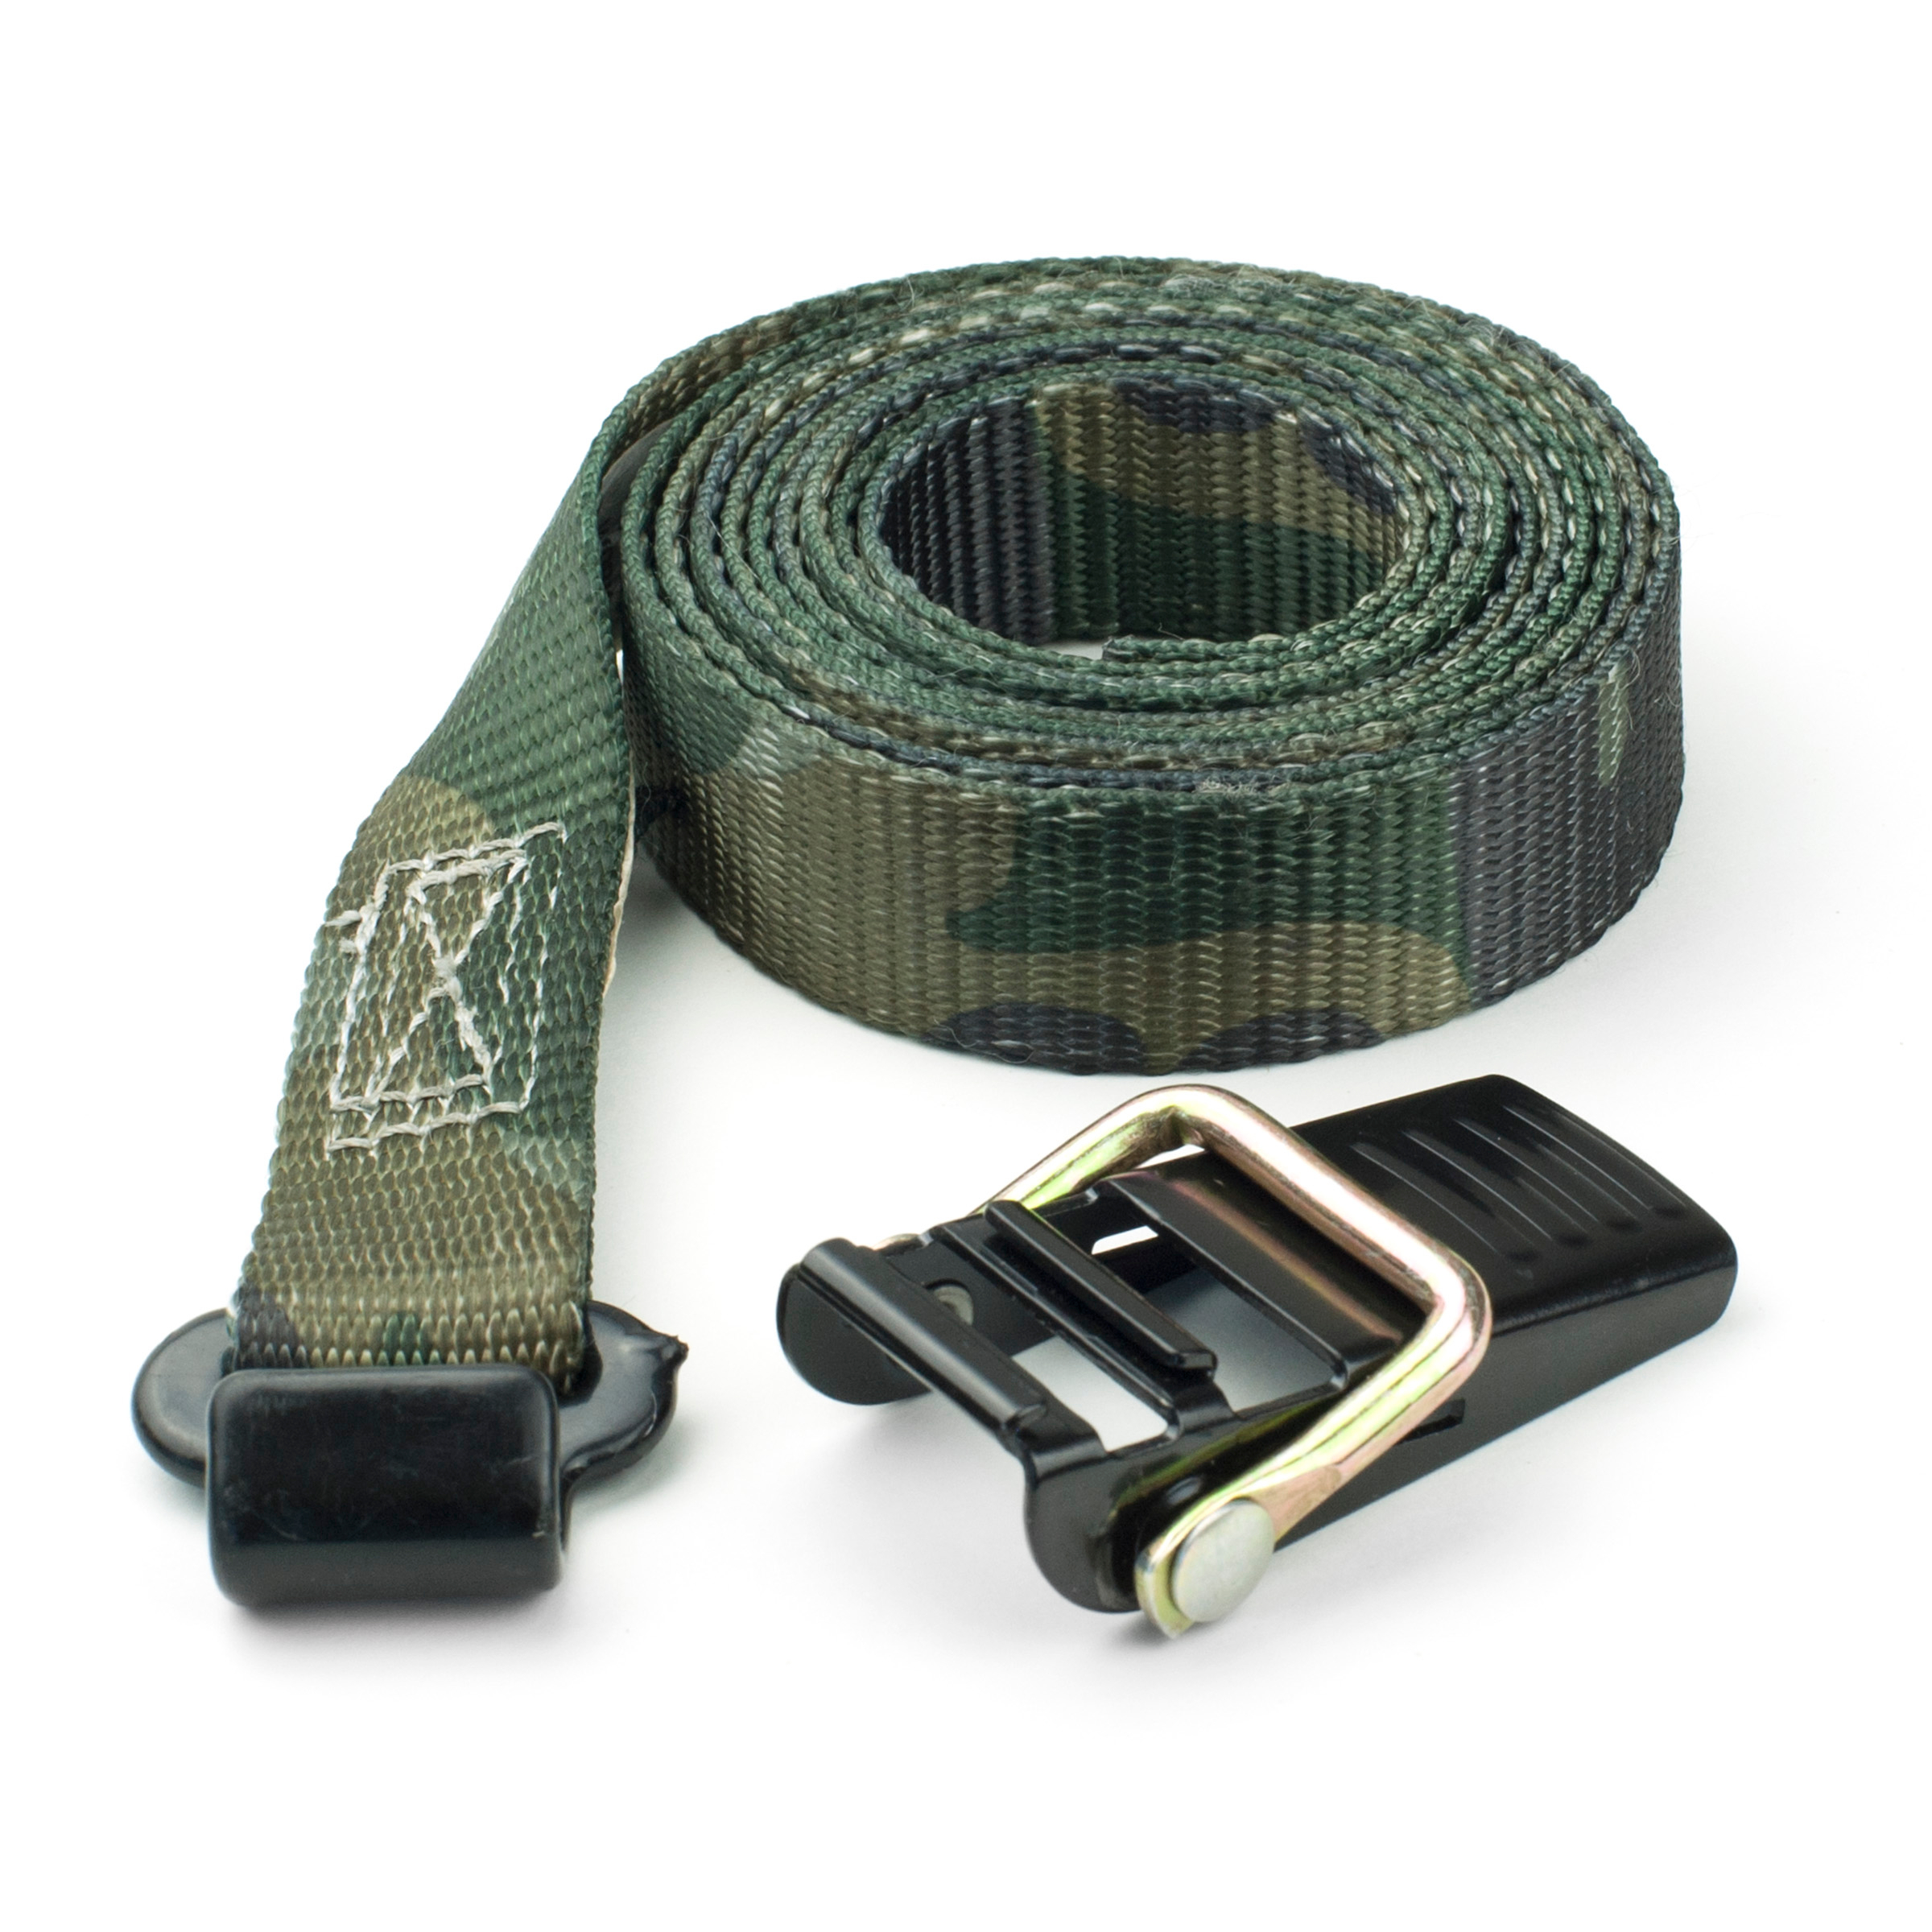 Ring of Steps Strap with separate Buckle (OCB)